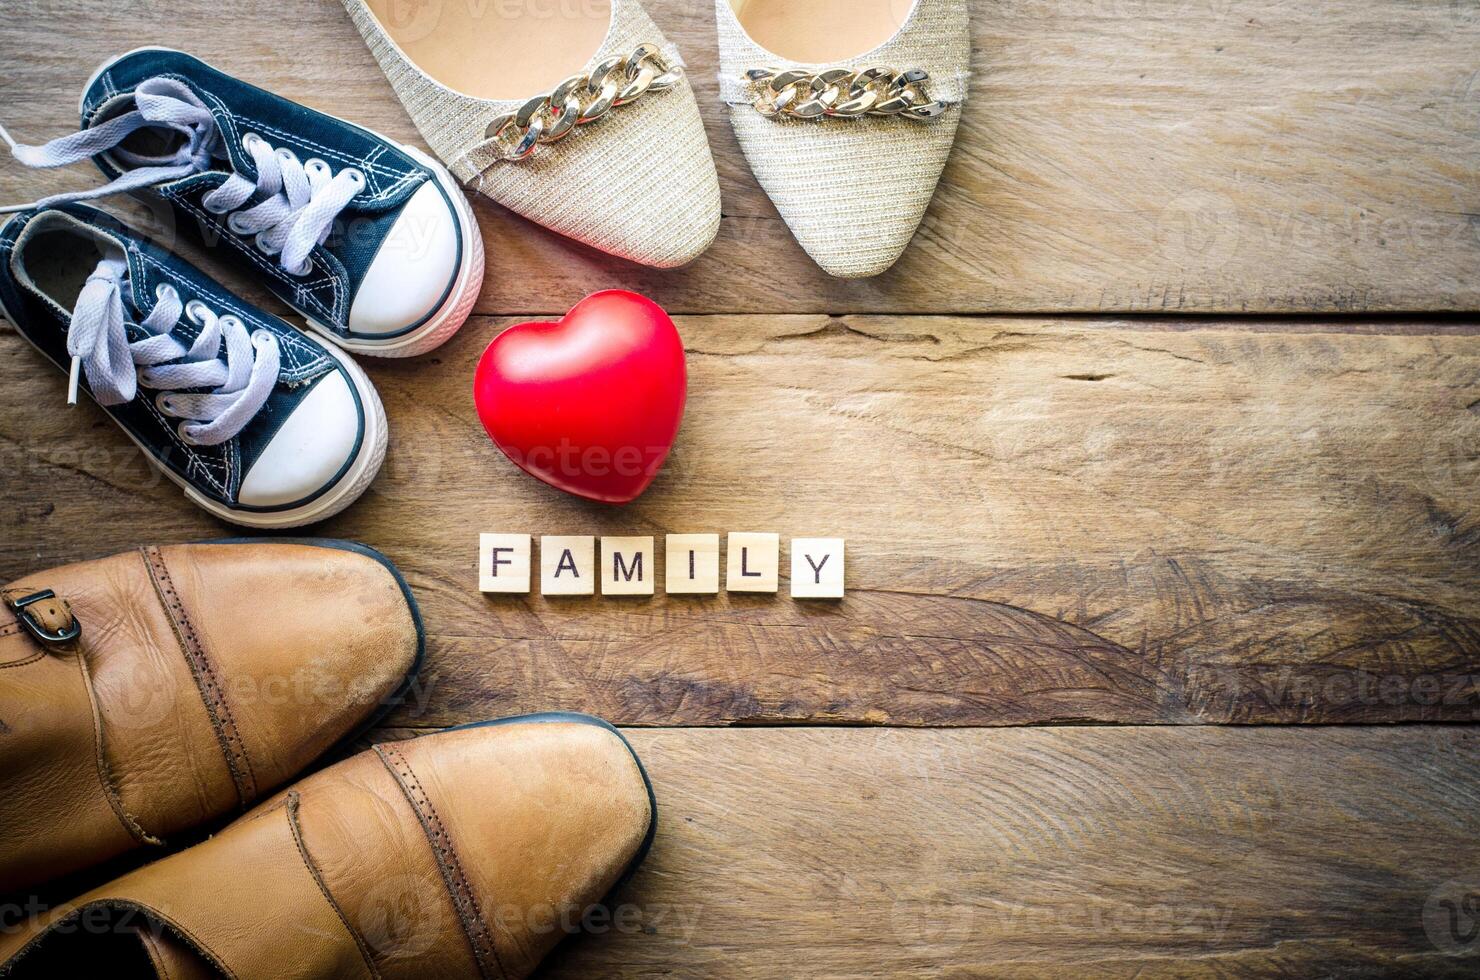 Heart shoes for family. For the love of a family whose parents show warmth and care. photo